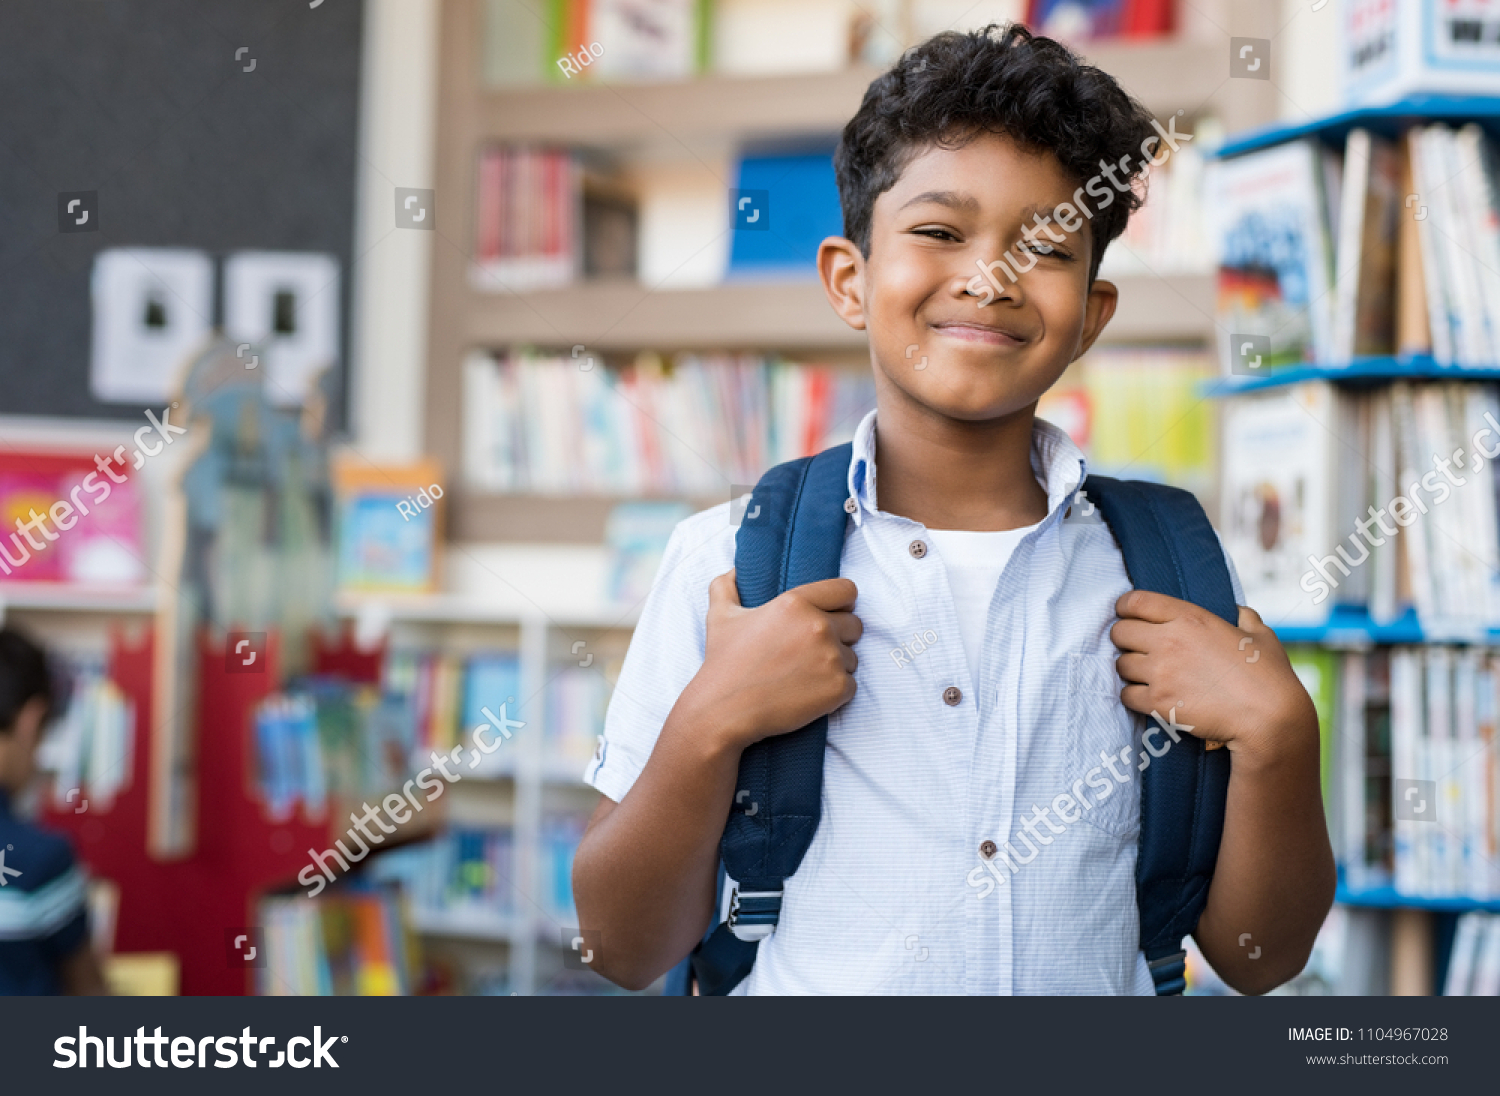 Portrait of smiling hispanic boy looking at camera. Young elementary schoolboy carrying backpack and standing in library at school. Cheerful middle eastern child standing with library background. #1104967028